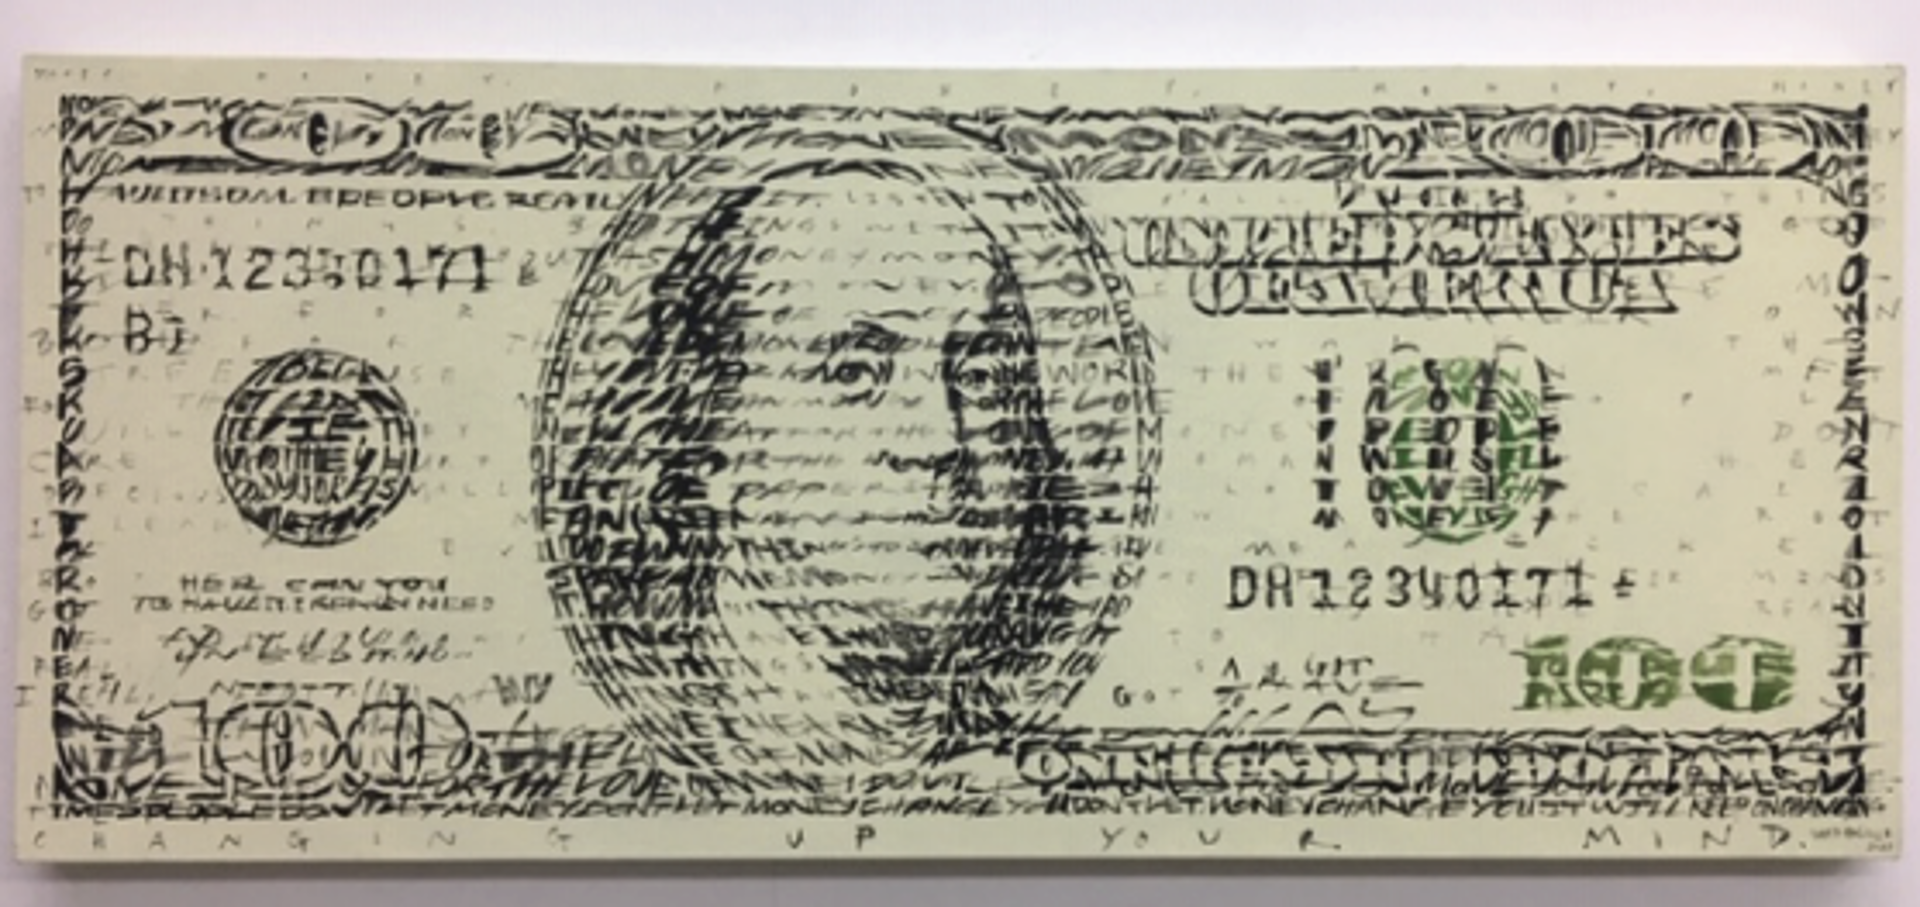 $100 Bill ('For The Love of Money' By The OJ's) by David Hollier